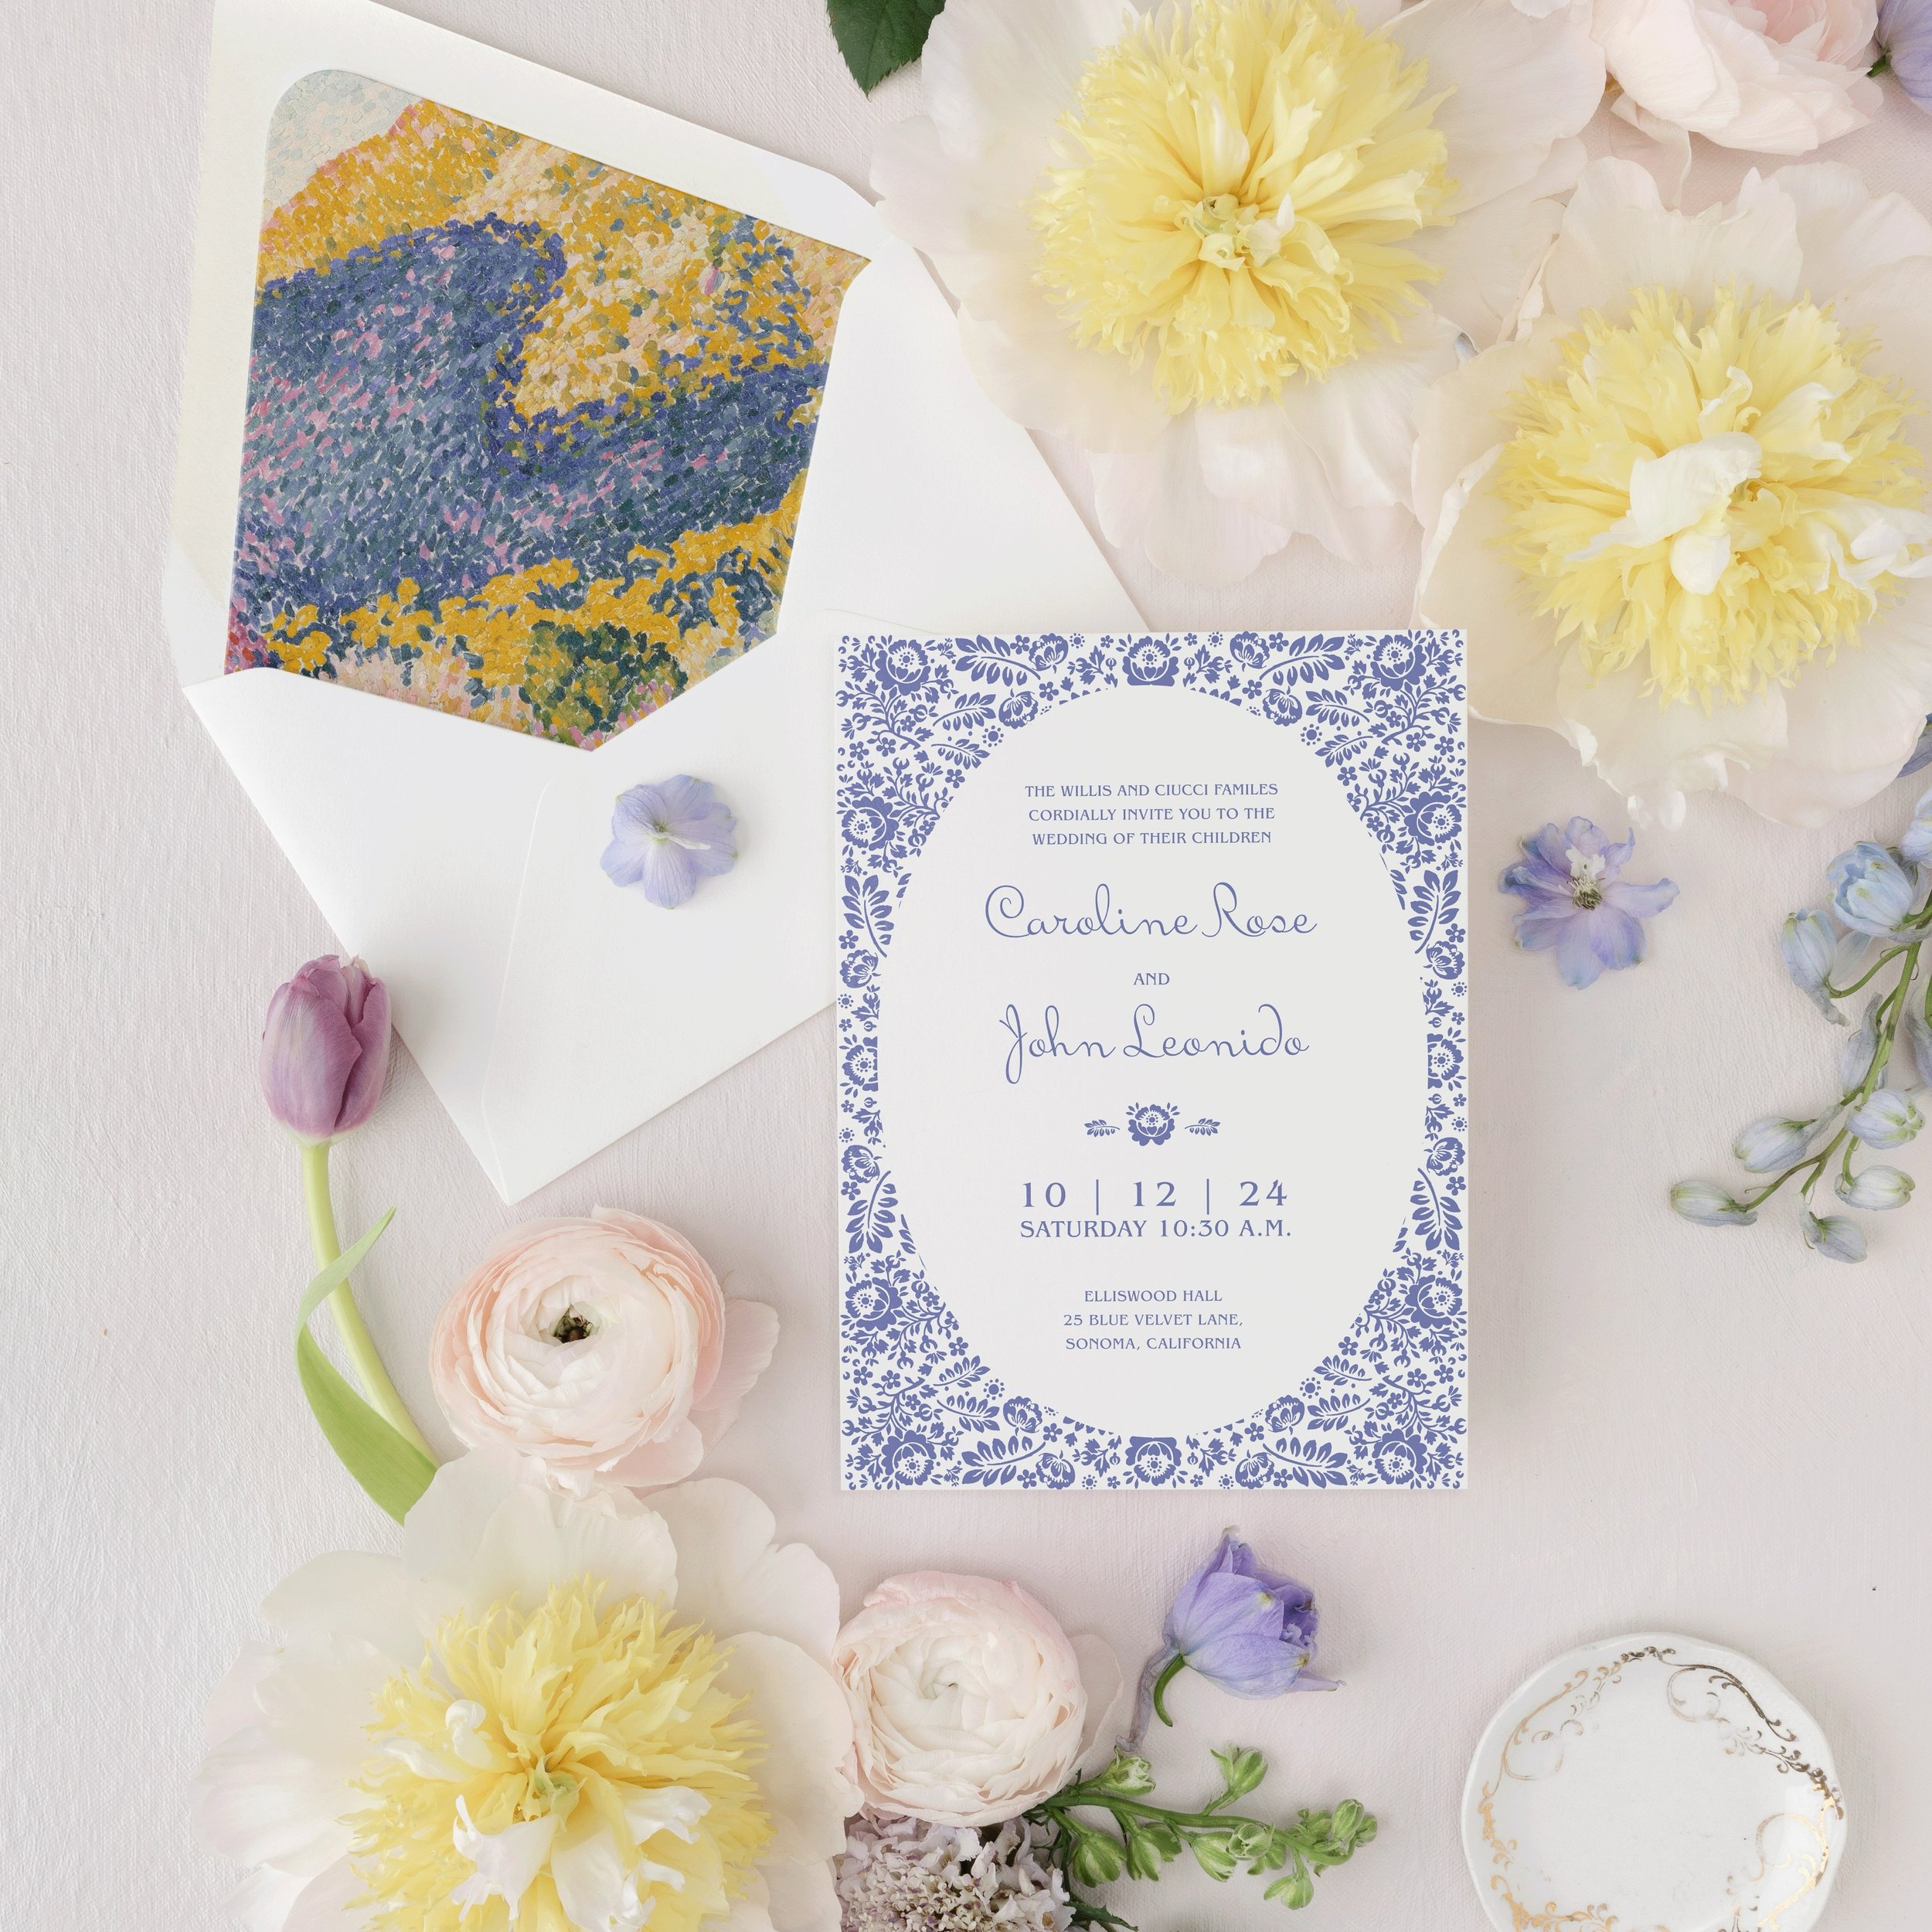 Designed this invitation using some vintage wallpaper as inspiration! The pattern looks lovely in all colors but I especially love it here in periwinkle. 

#weddingstationerydesign #sonoma #invitations #design #flatlay #monet #fairytalewedding #charl